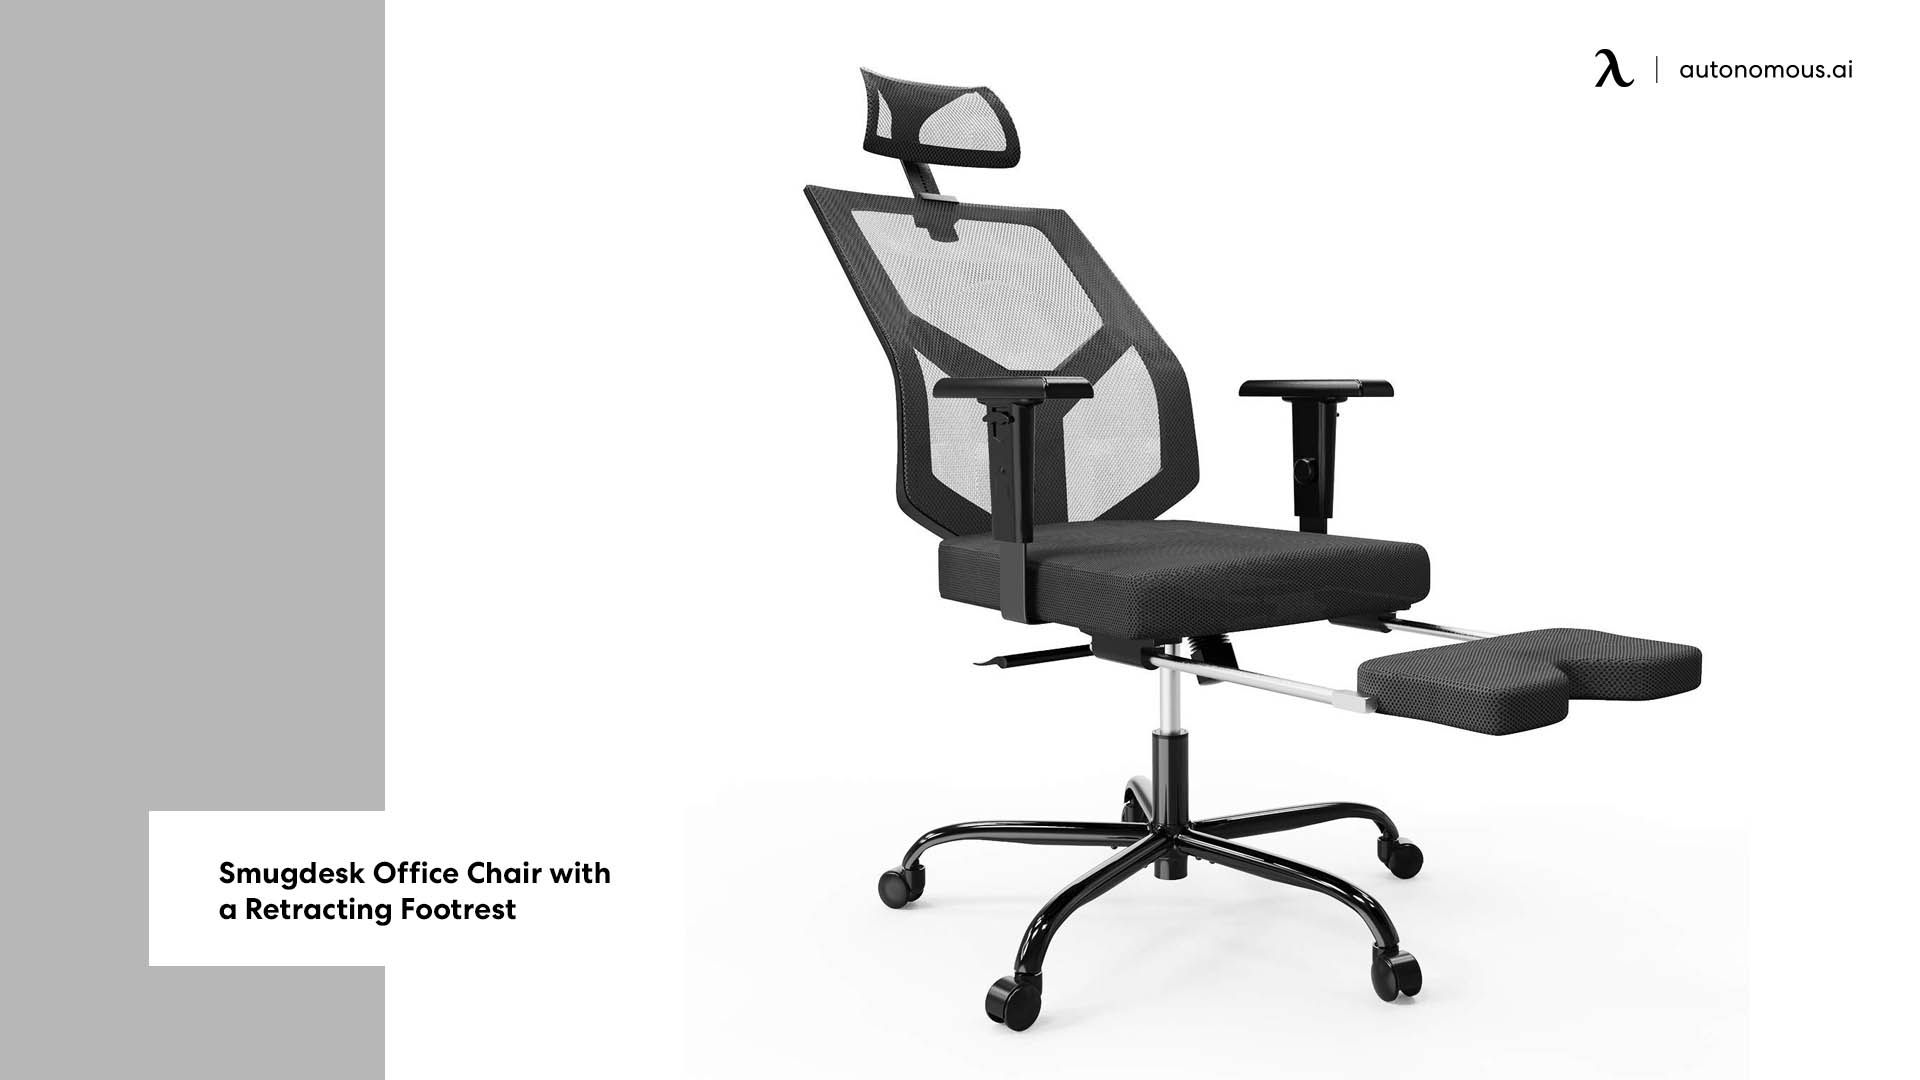 20. Smugdesk Office Chair with a Retracting Footrest